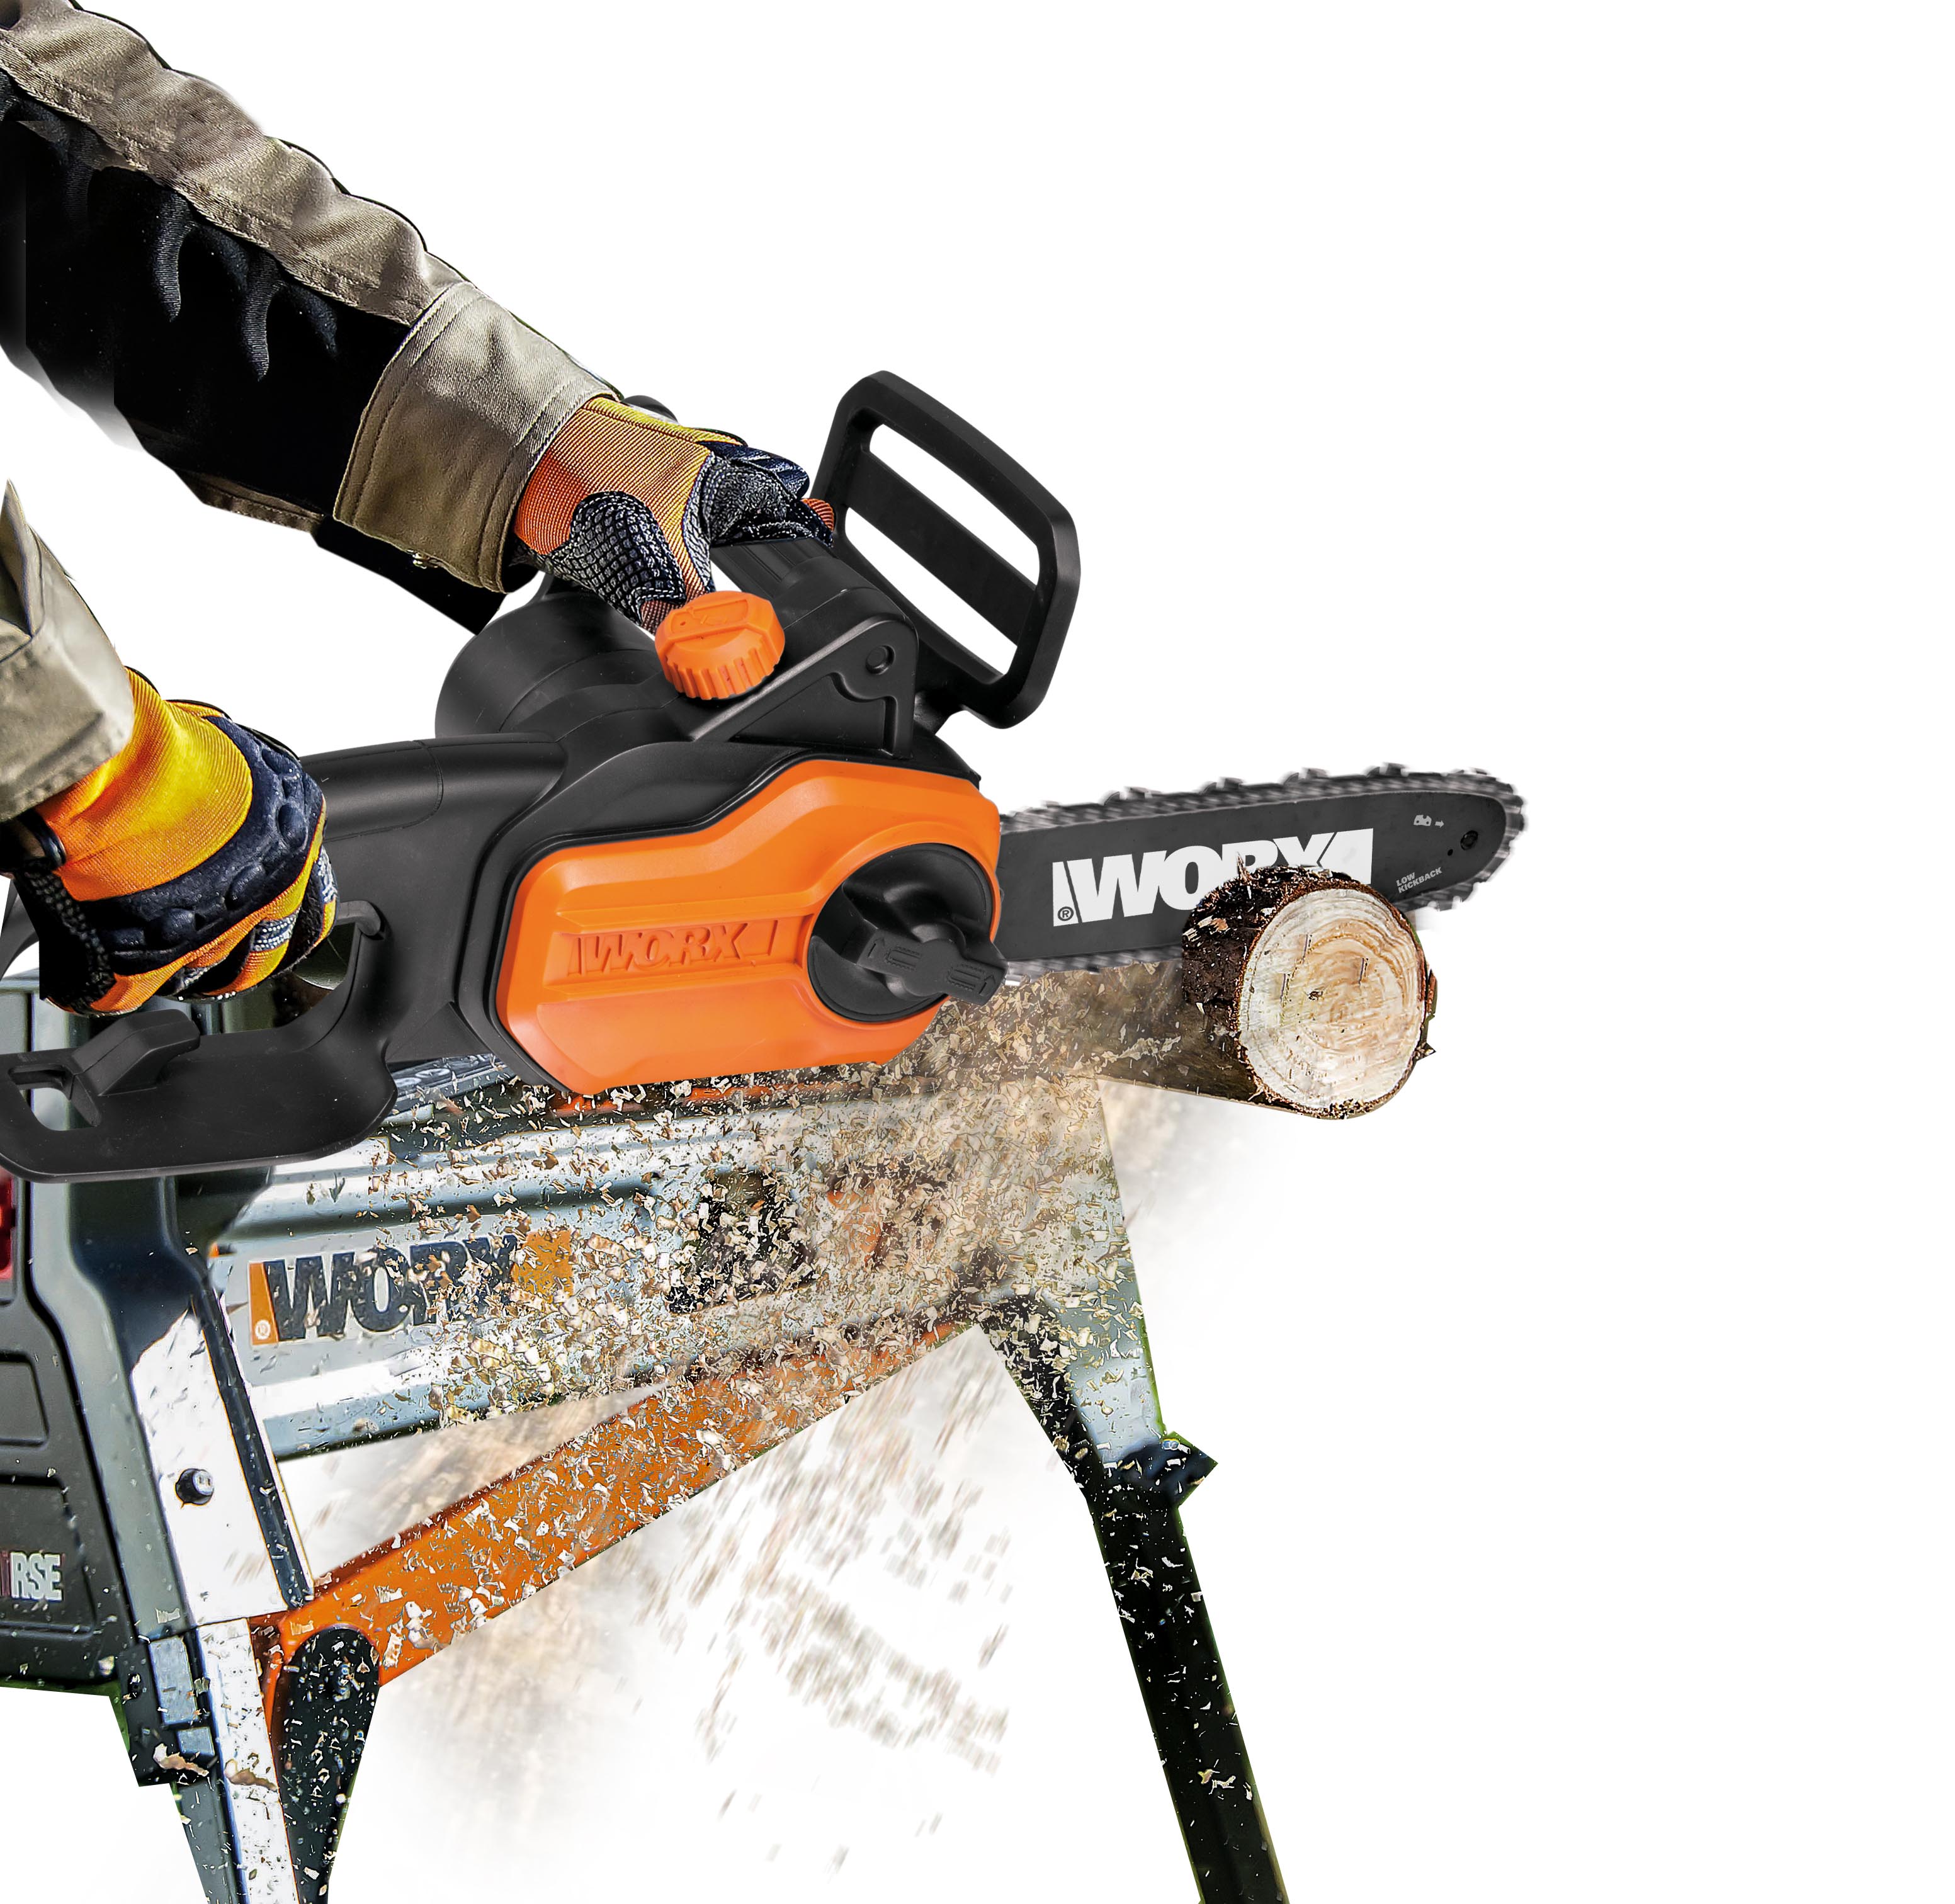 WORX 8A, 10 in. Electric Pole saw detaches without tools from its extension pole for yard clean-up or cutting firewood.